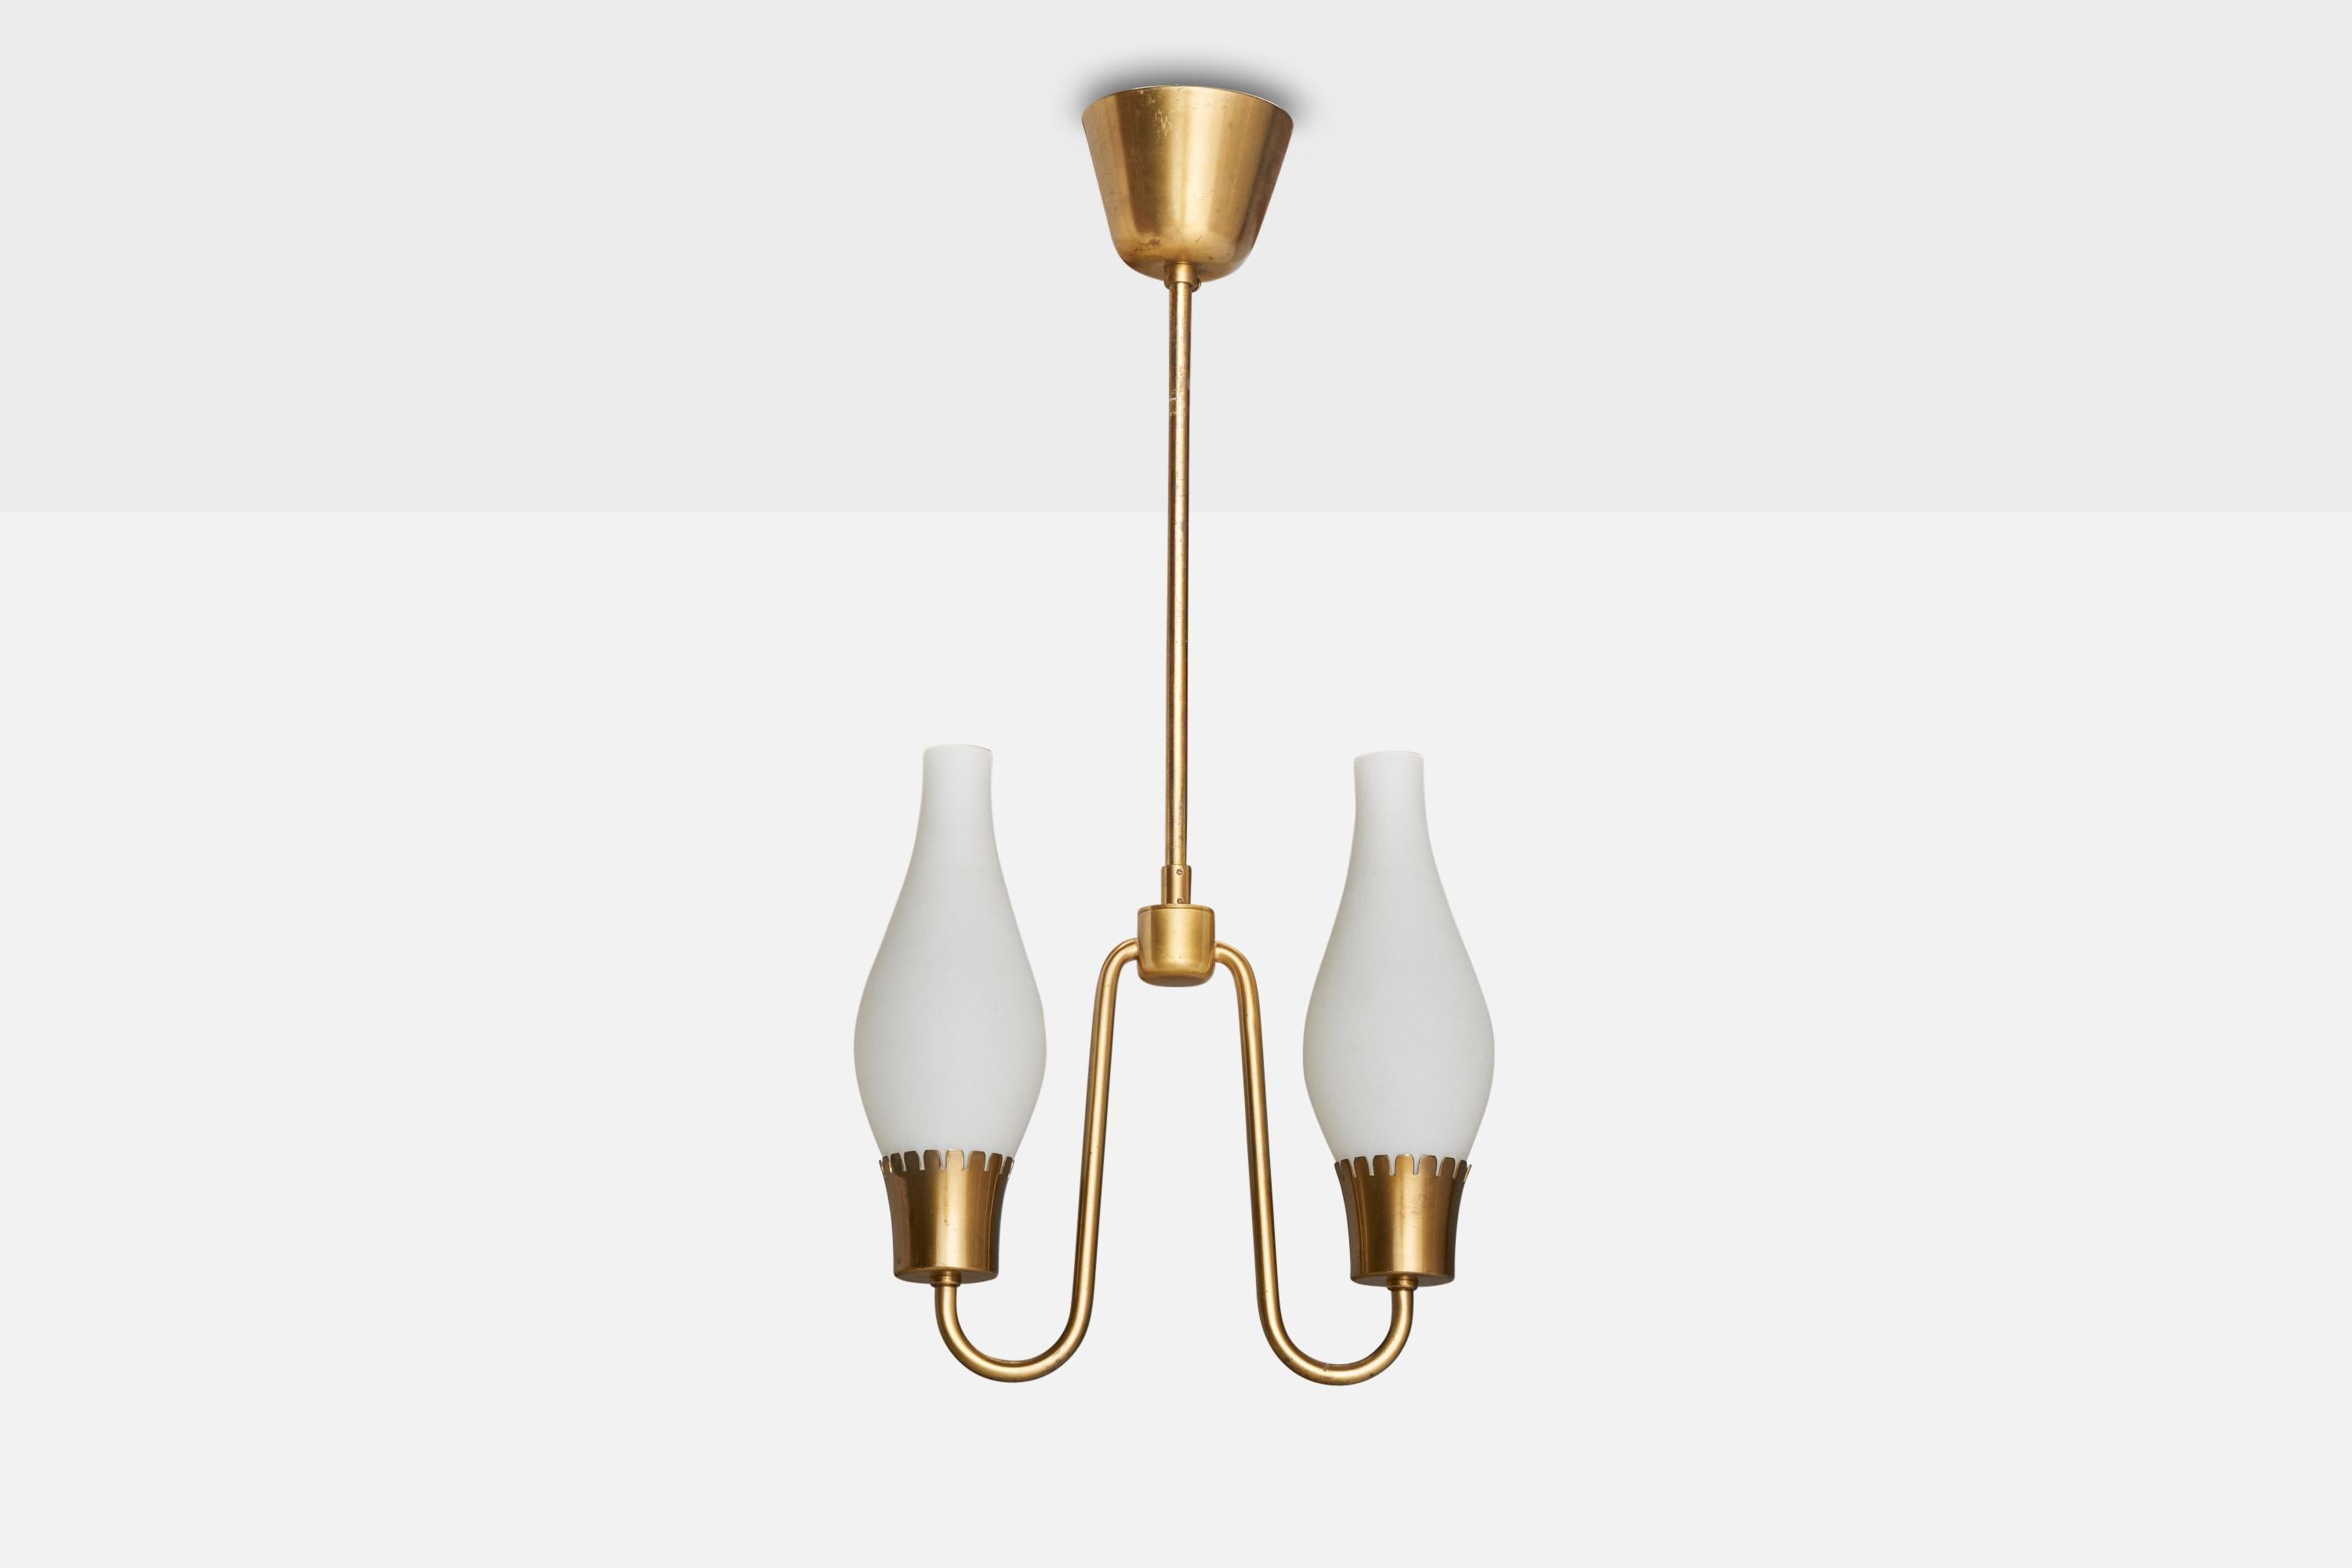 A brass and opaline glass pendant light designed and produced in Sweden, c. 1950s.

Dimensions of canopy (inches): 3” H x 3.75” Diameter
Socket takes standard E-14 bulbs. 2 sockets.There is no maximum wattage stated on the fixture. All lighting will